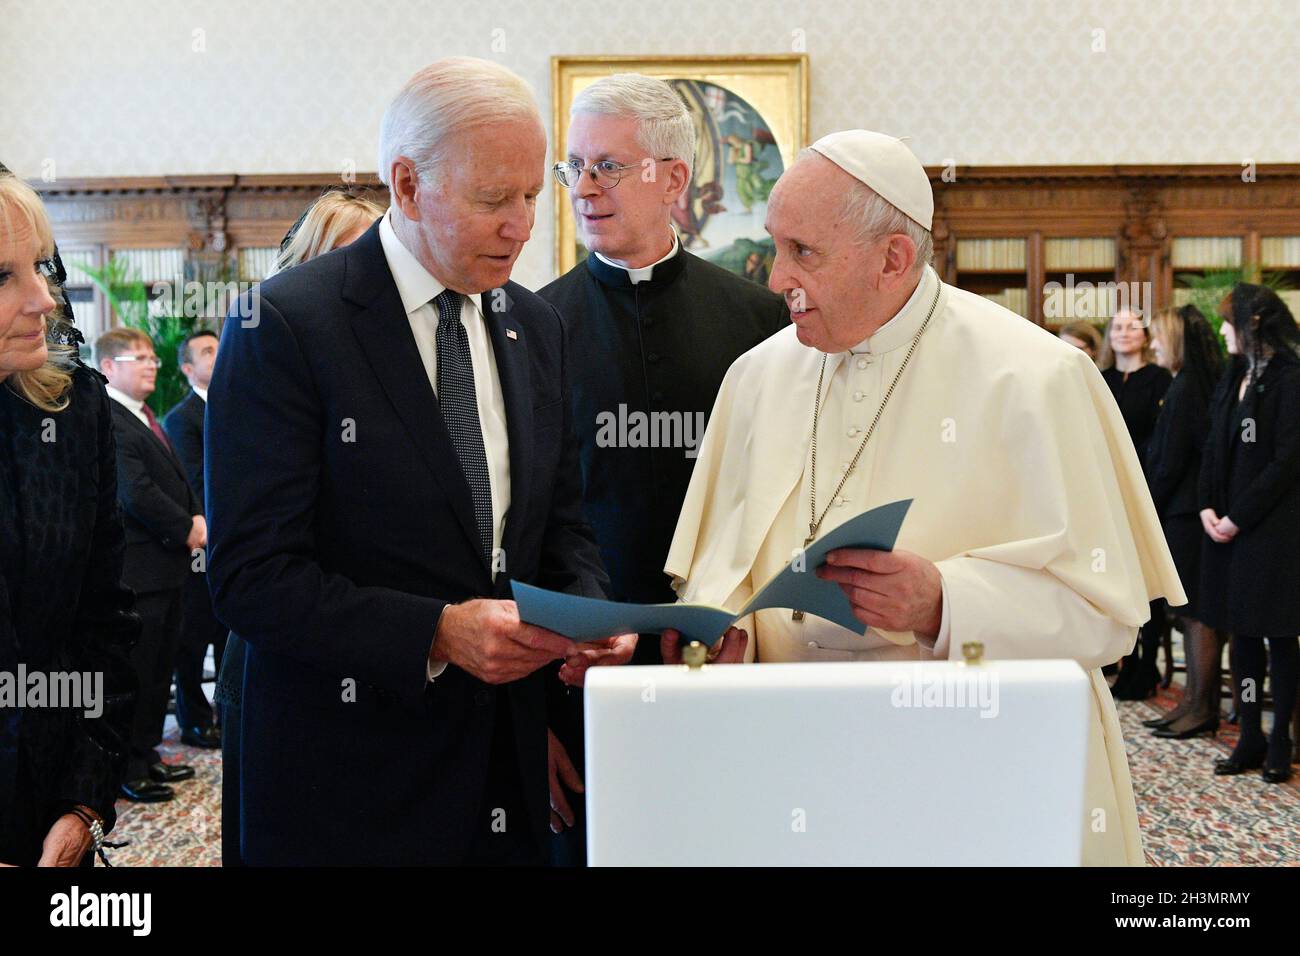 Pope Francis meets The President of the United States of America Joe Biden during a private audience at the Vatican, October 29, 2021 in Vatican City, Rome Italy. PHOTO FOR EDITORIAL USE ONLY!!! Stock Photo